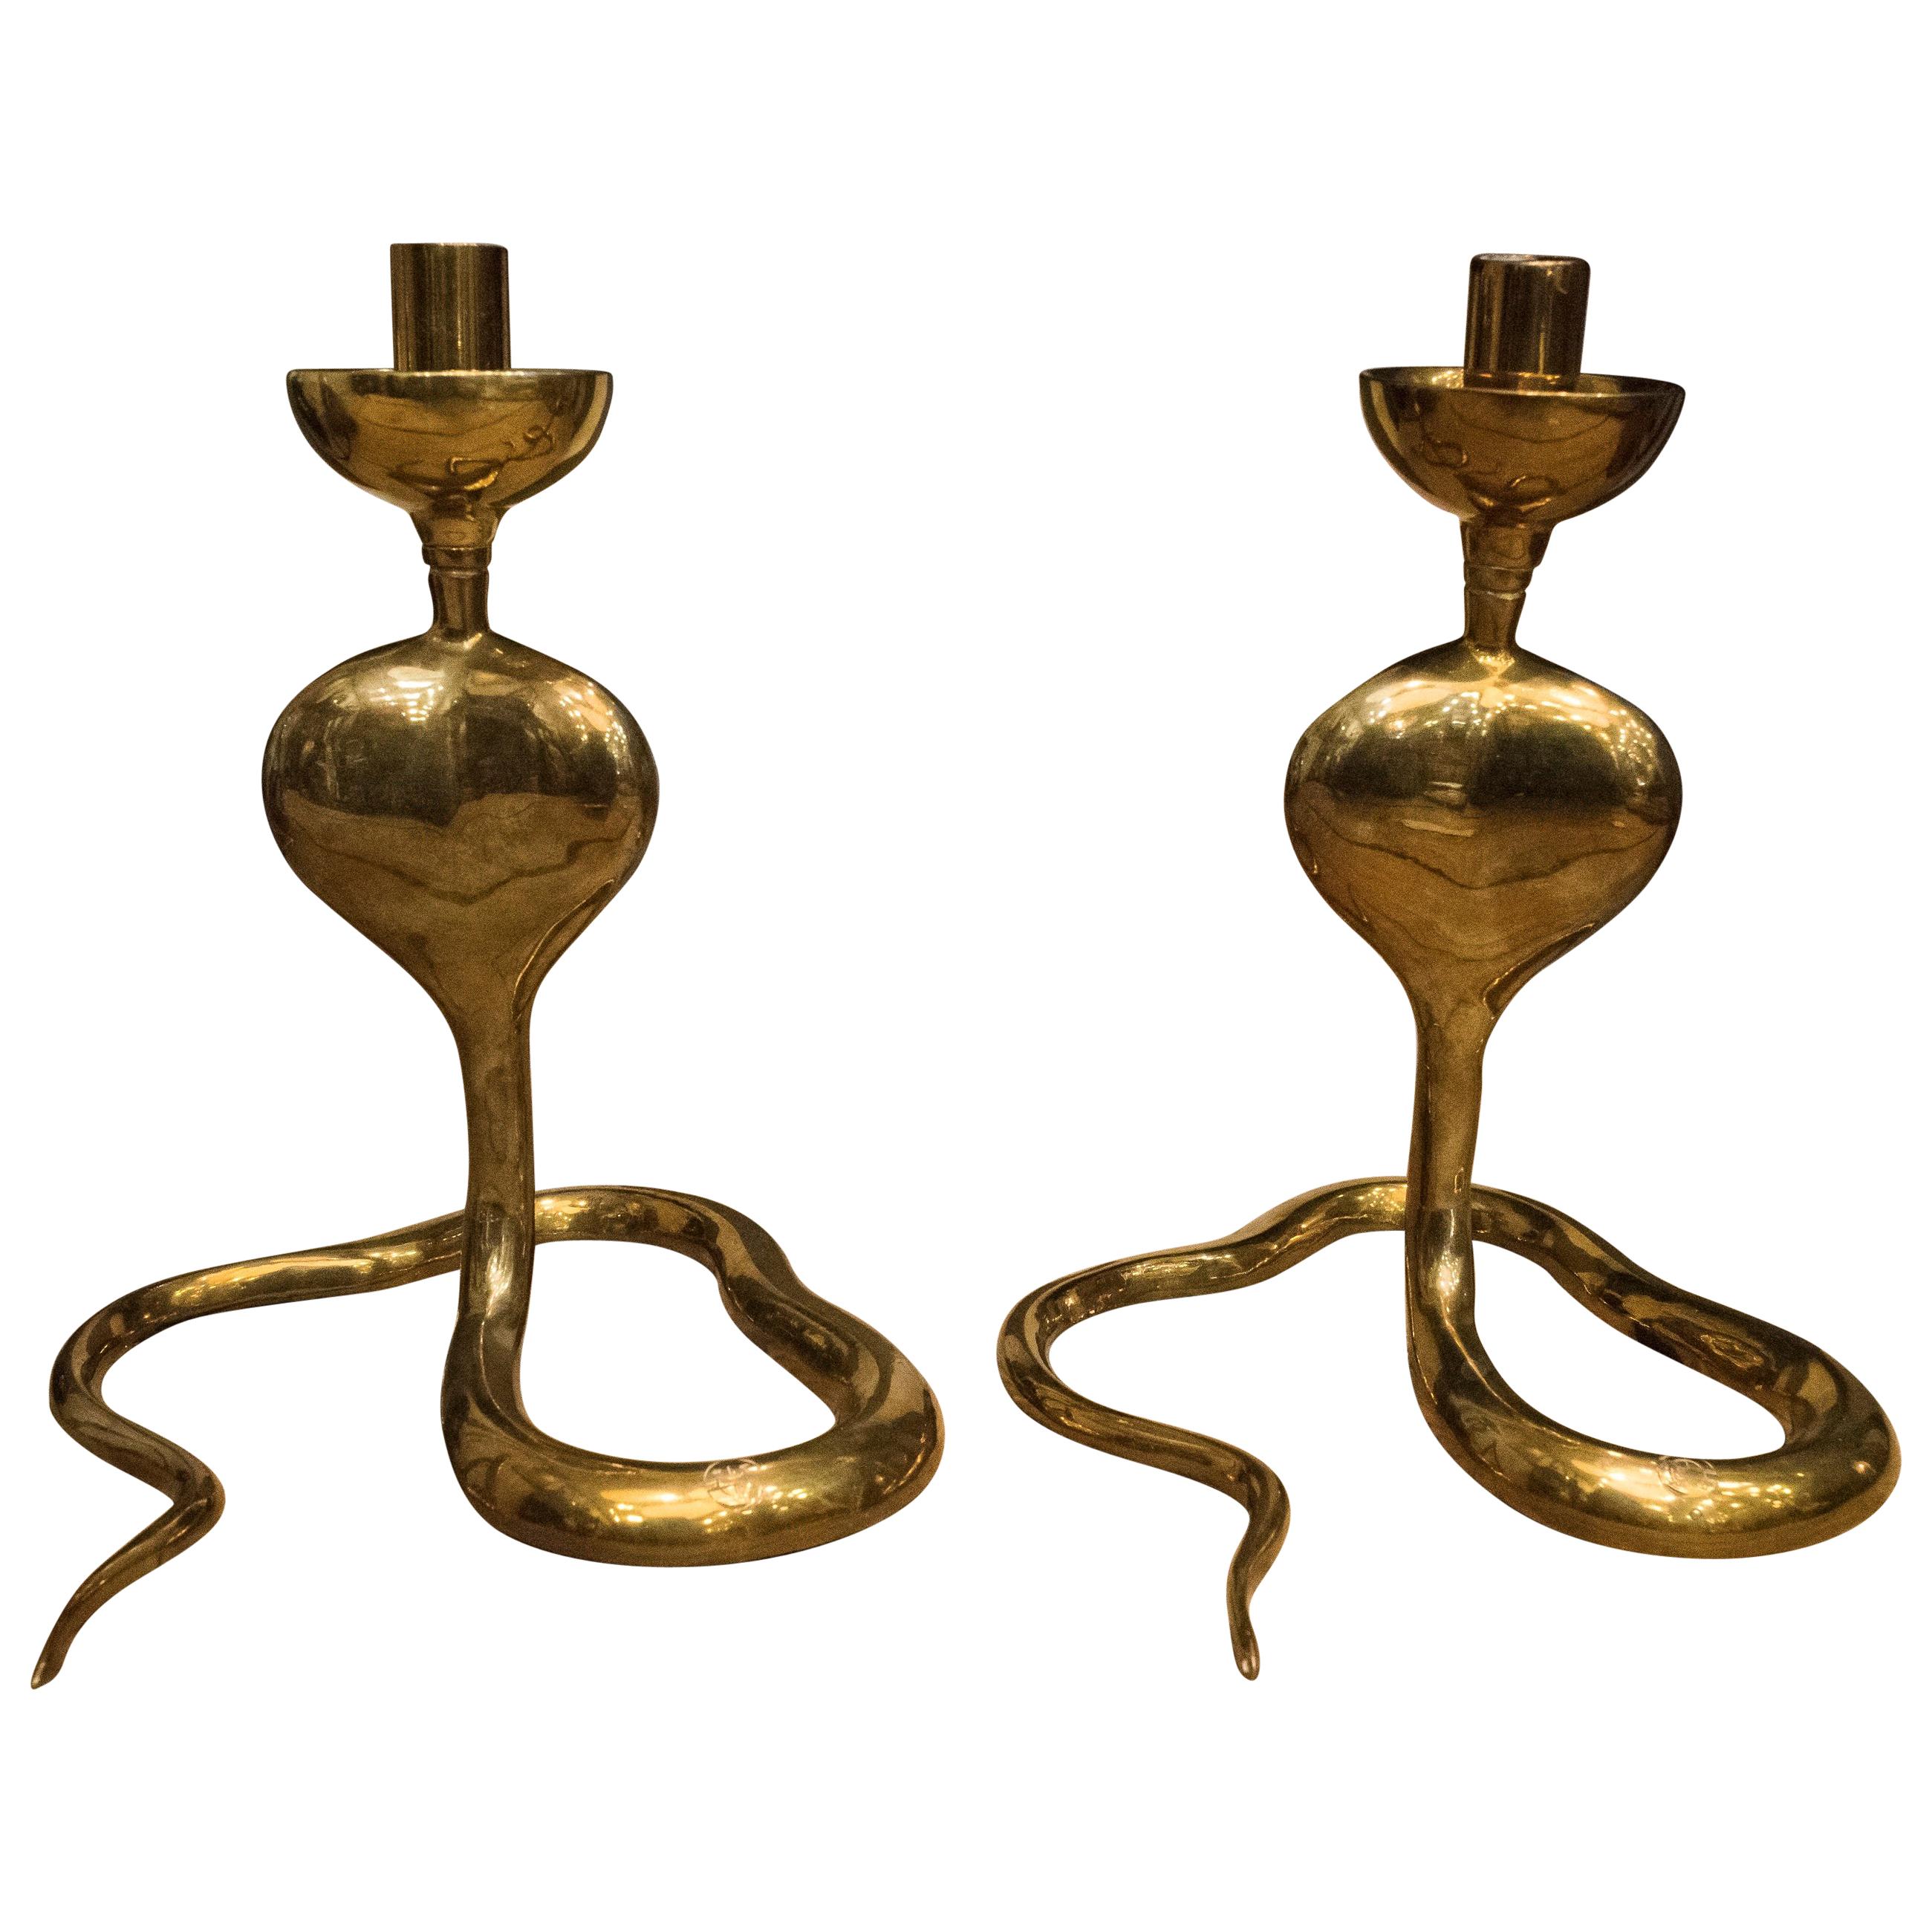 1970s Golden Brass Italian Couple of Cobra-Shaped Candelsticks, with Contrasts